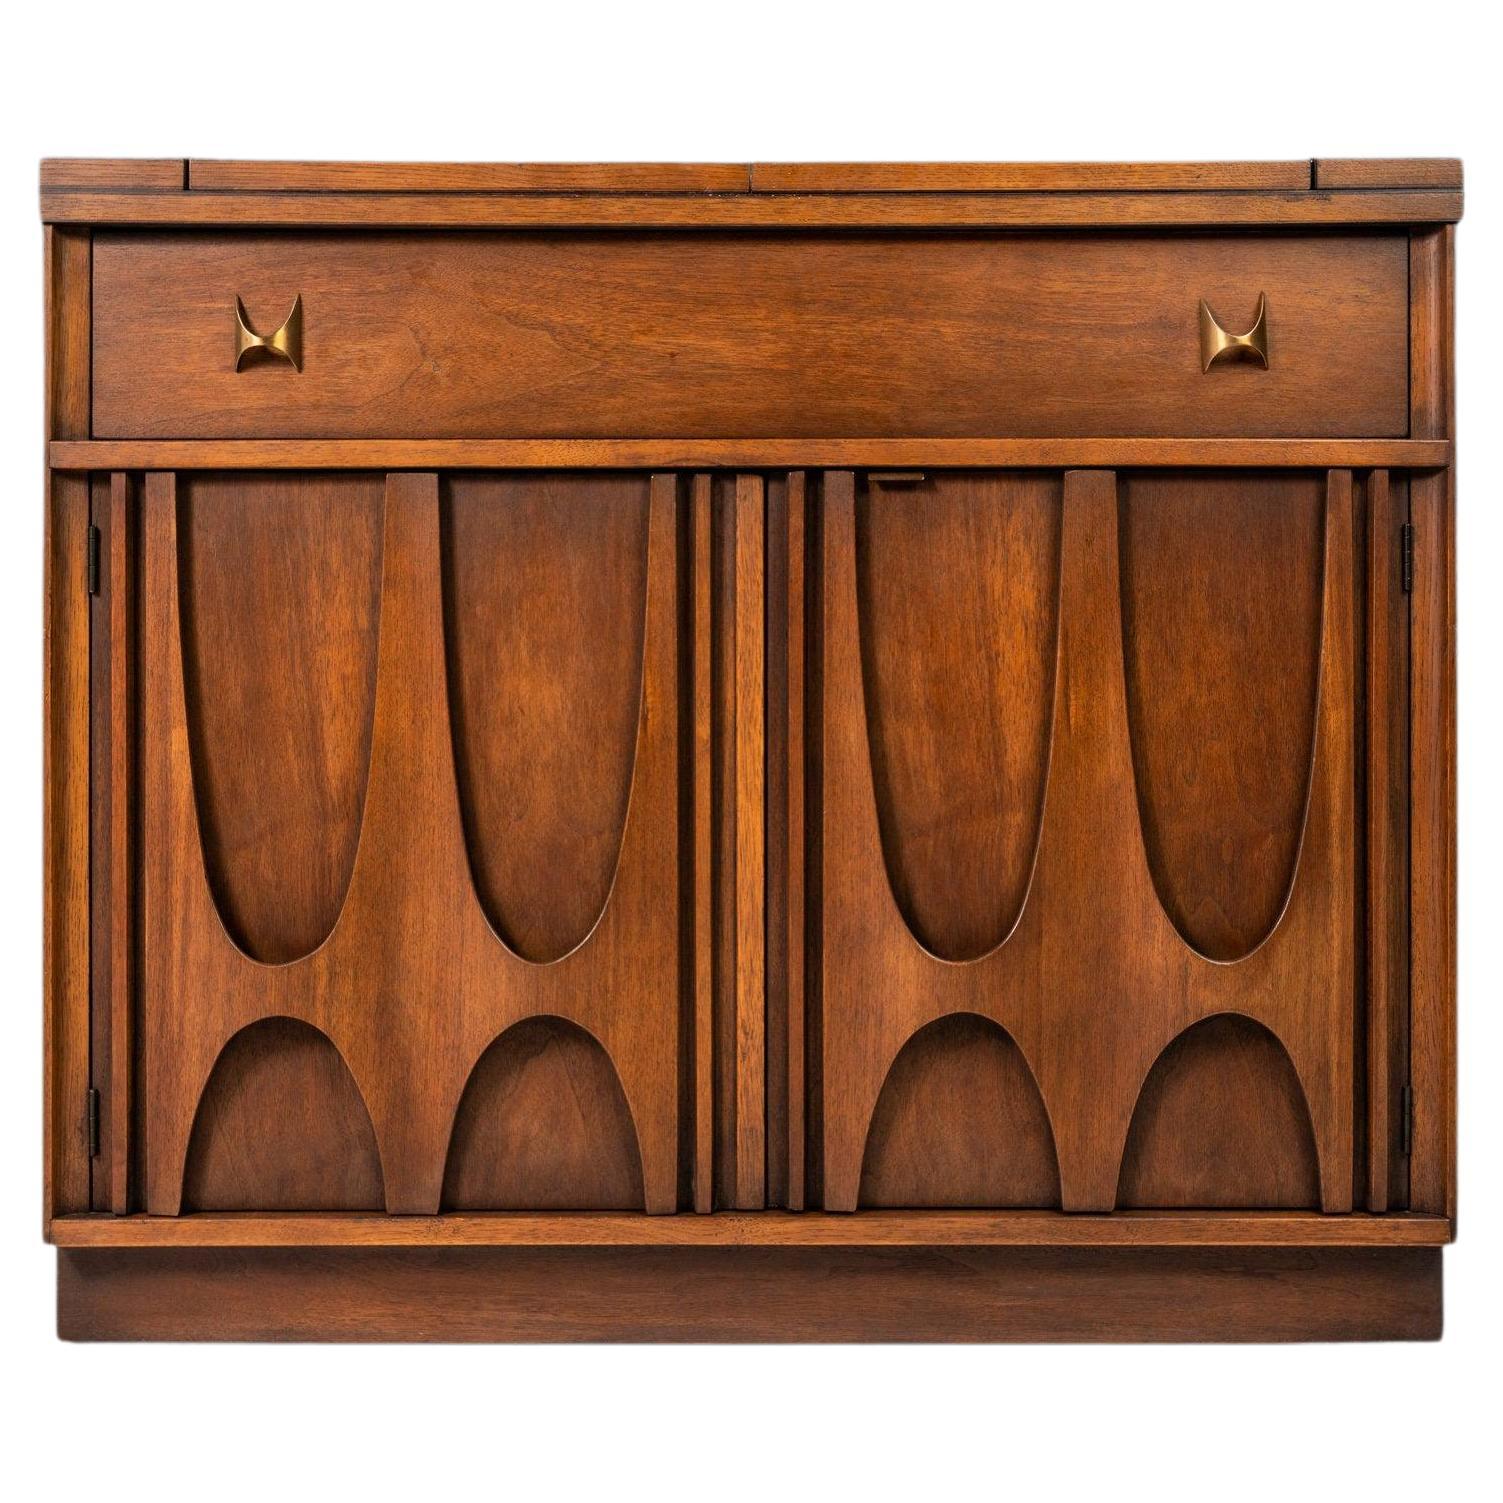 Mid Century Modern Expanding Brasilia Bar in Walnut by Broyhill, USA, c. 1960s For Sale